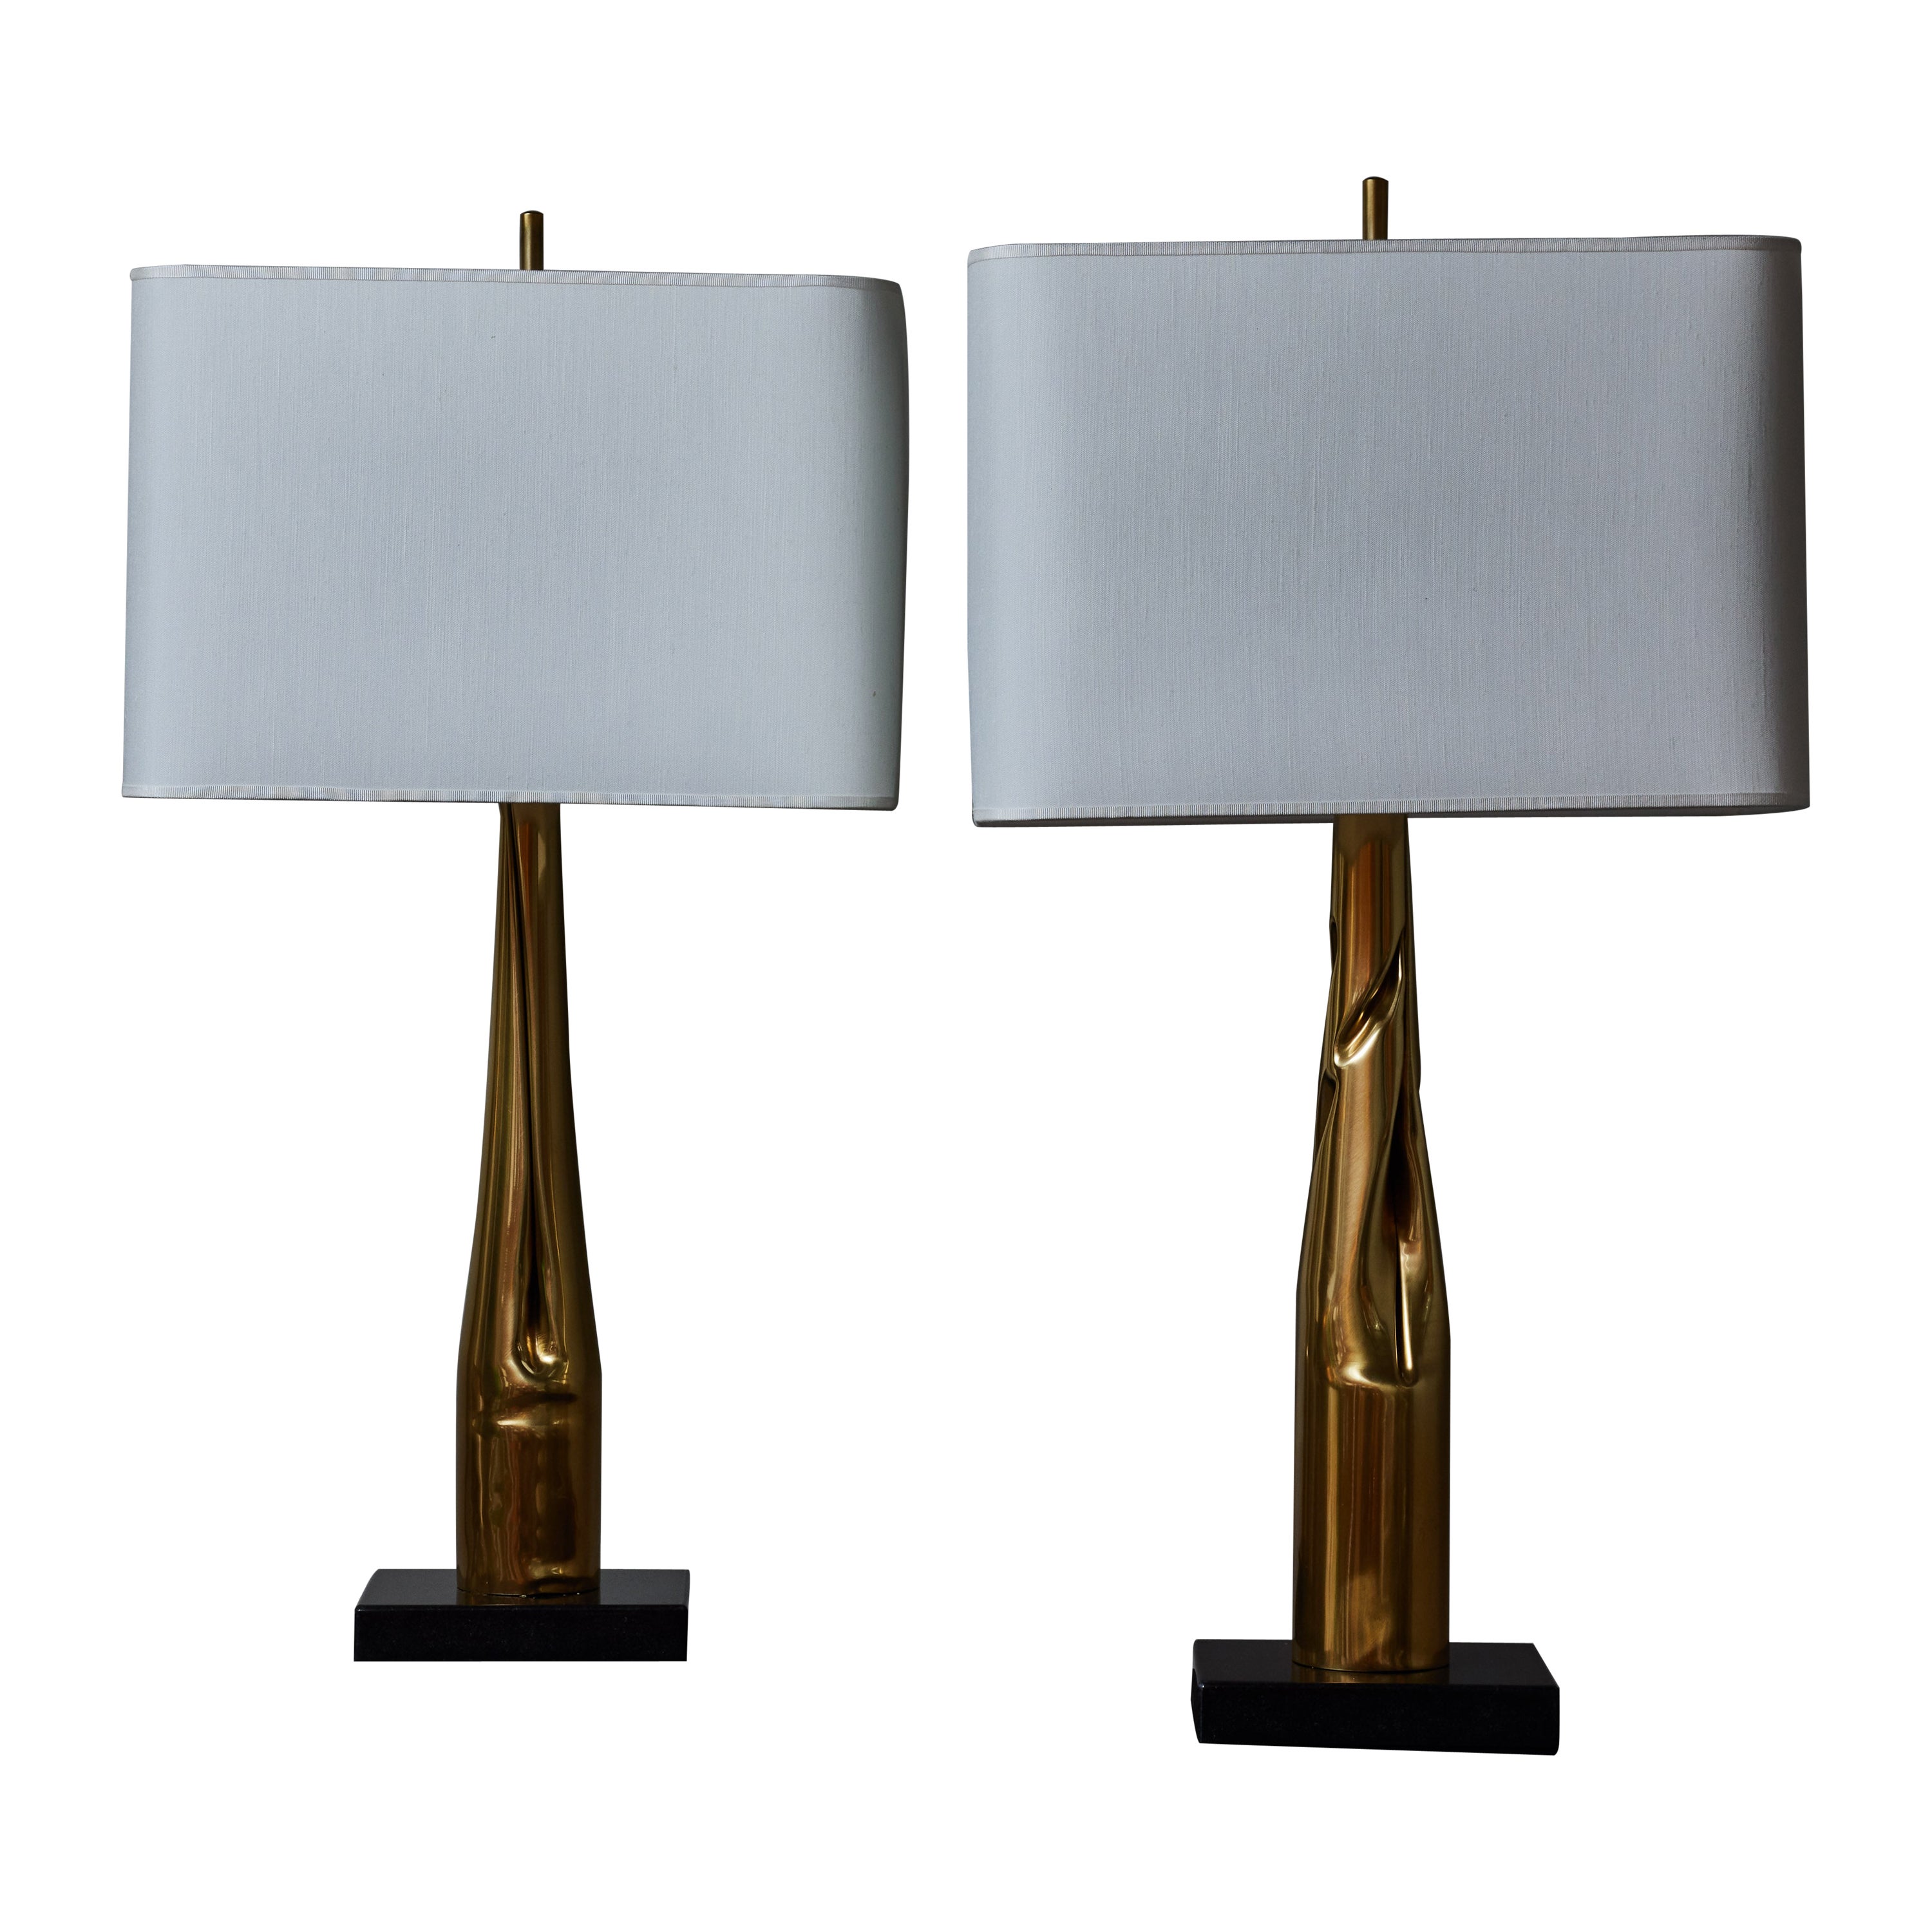 Pair of Brass and Marble Table Lamps by Esperia for Glustin Luminaires For Sale